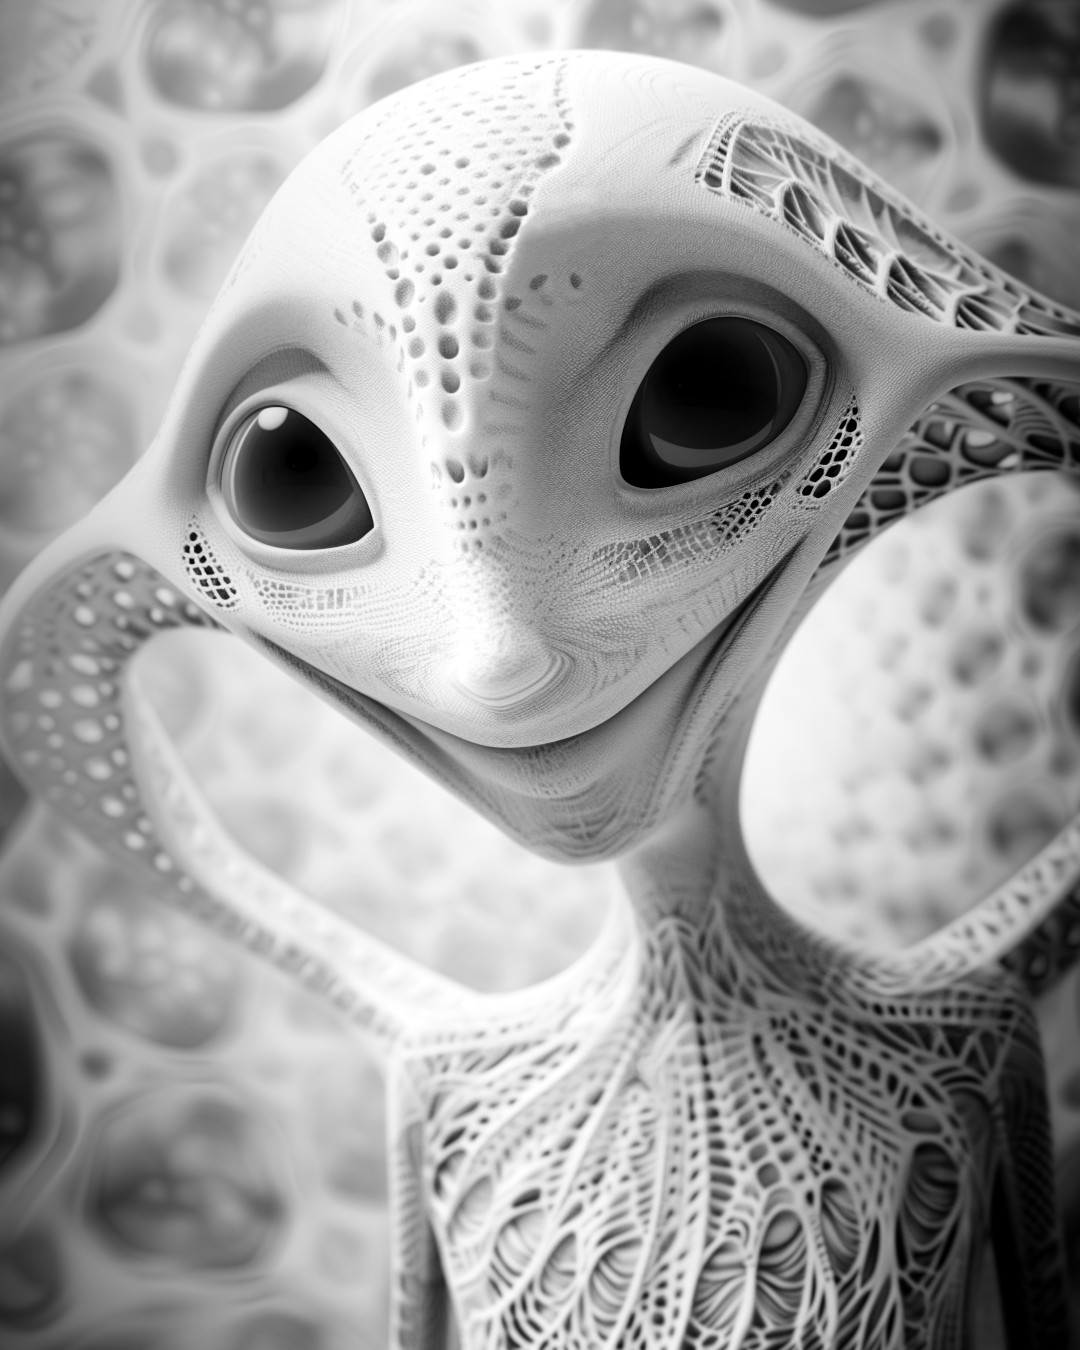 Cute alien, with big eyes and a happy expression, in black and white